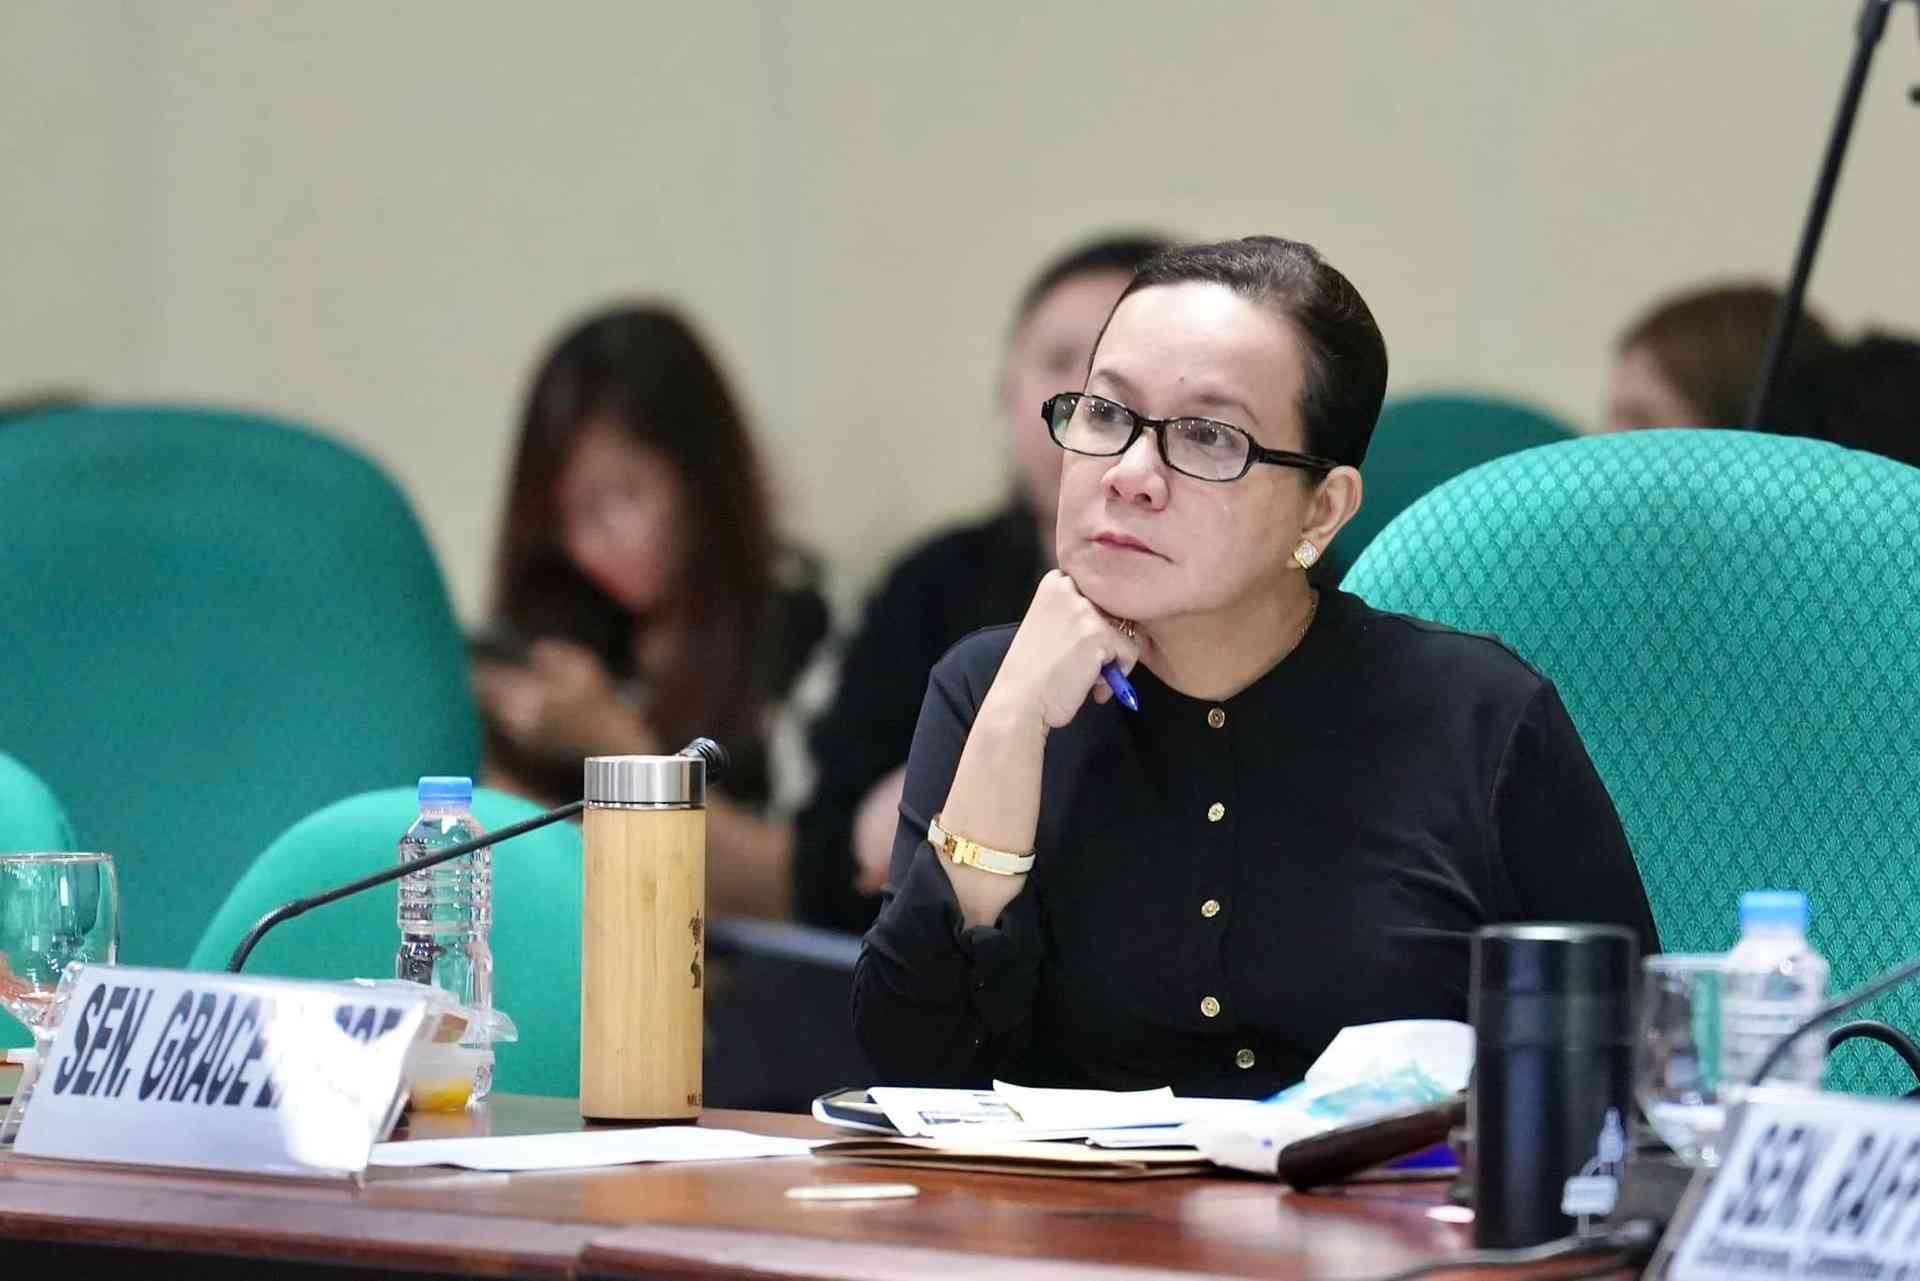 Sen Grace Poe weighs in on the EDSA busway ramp discourse